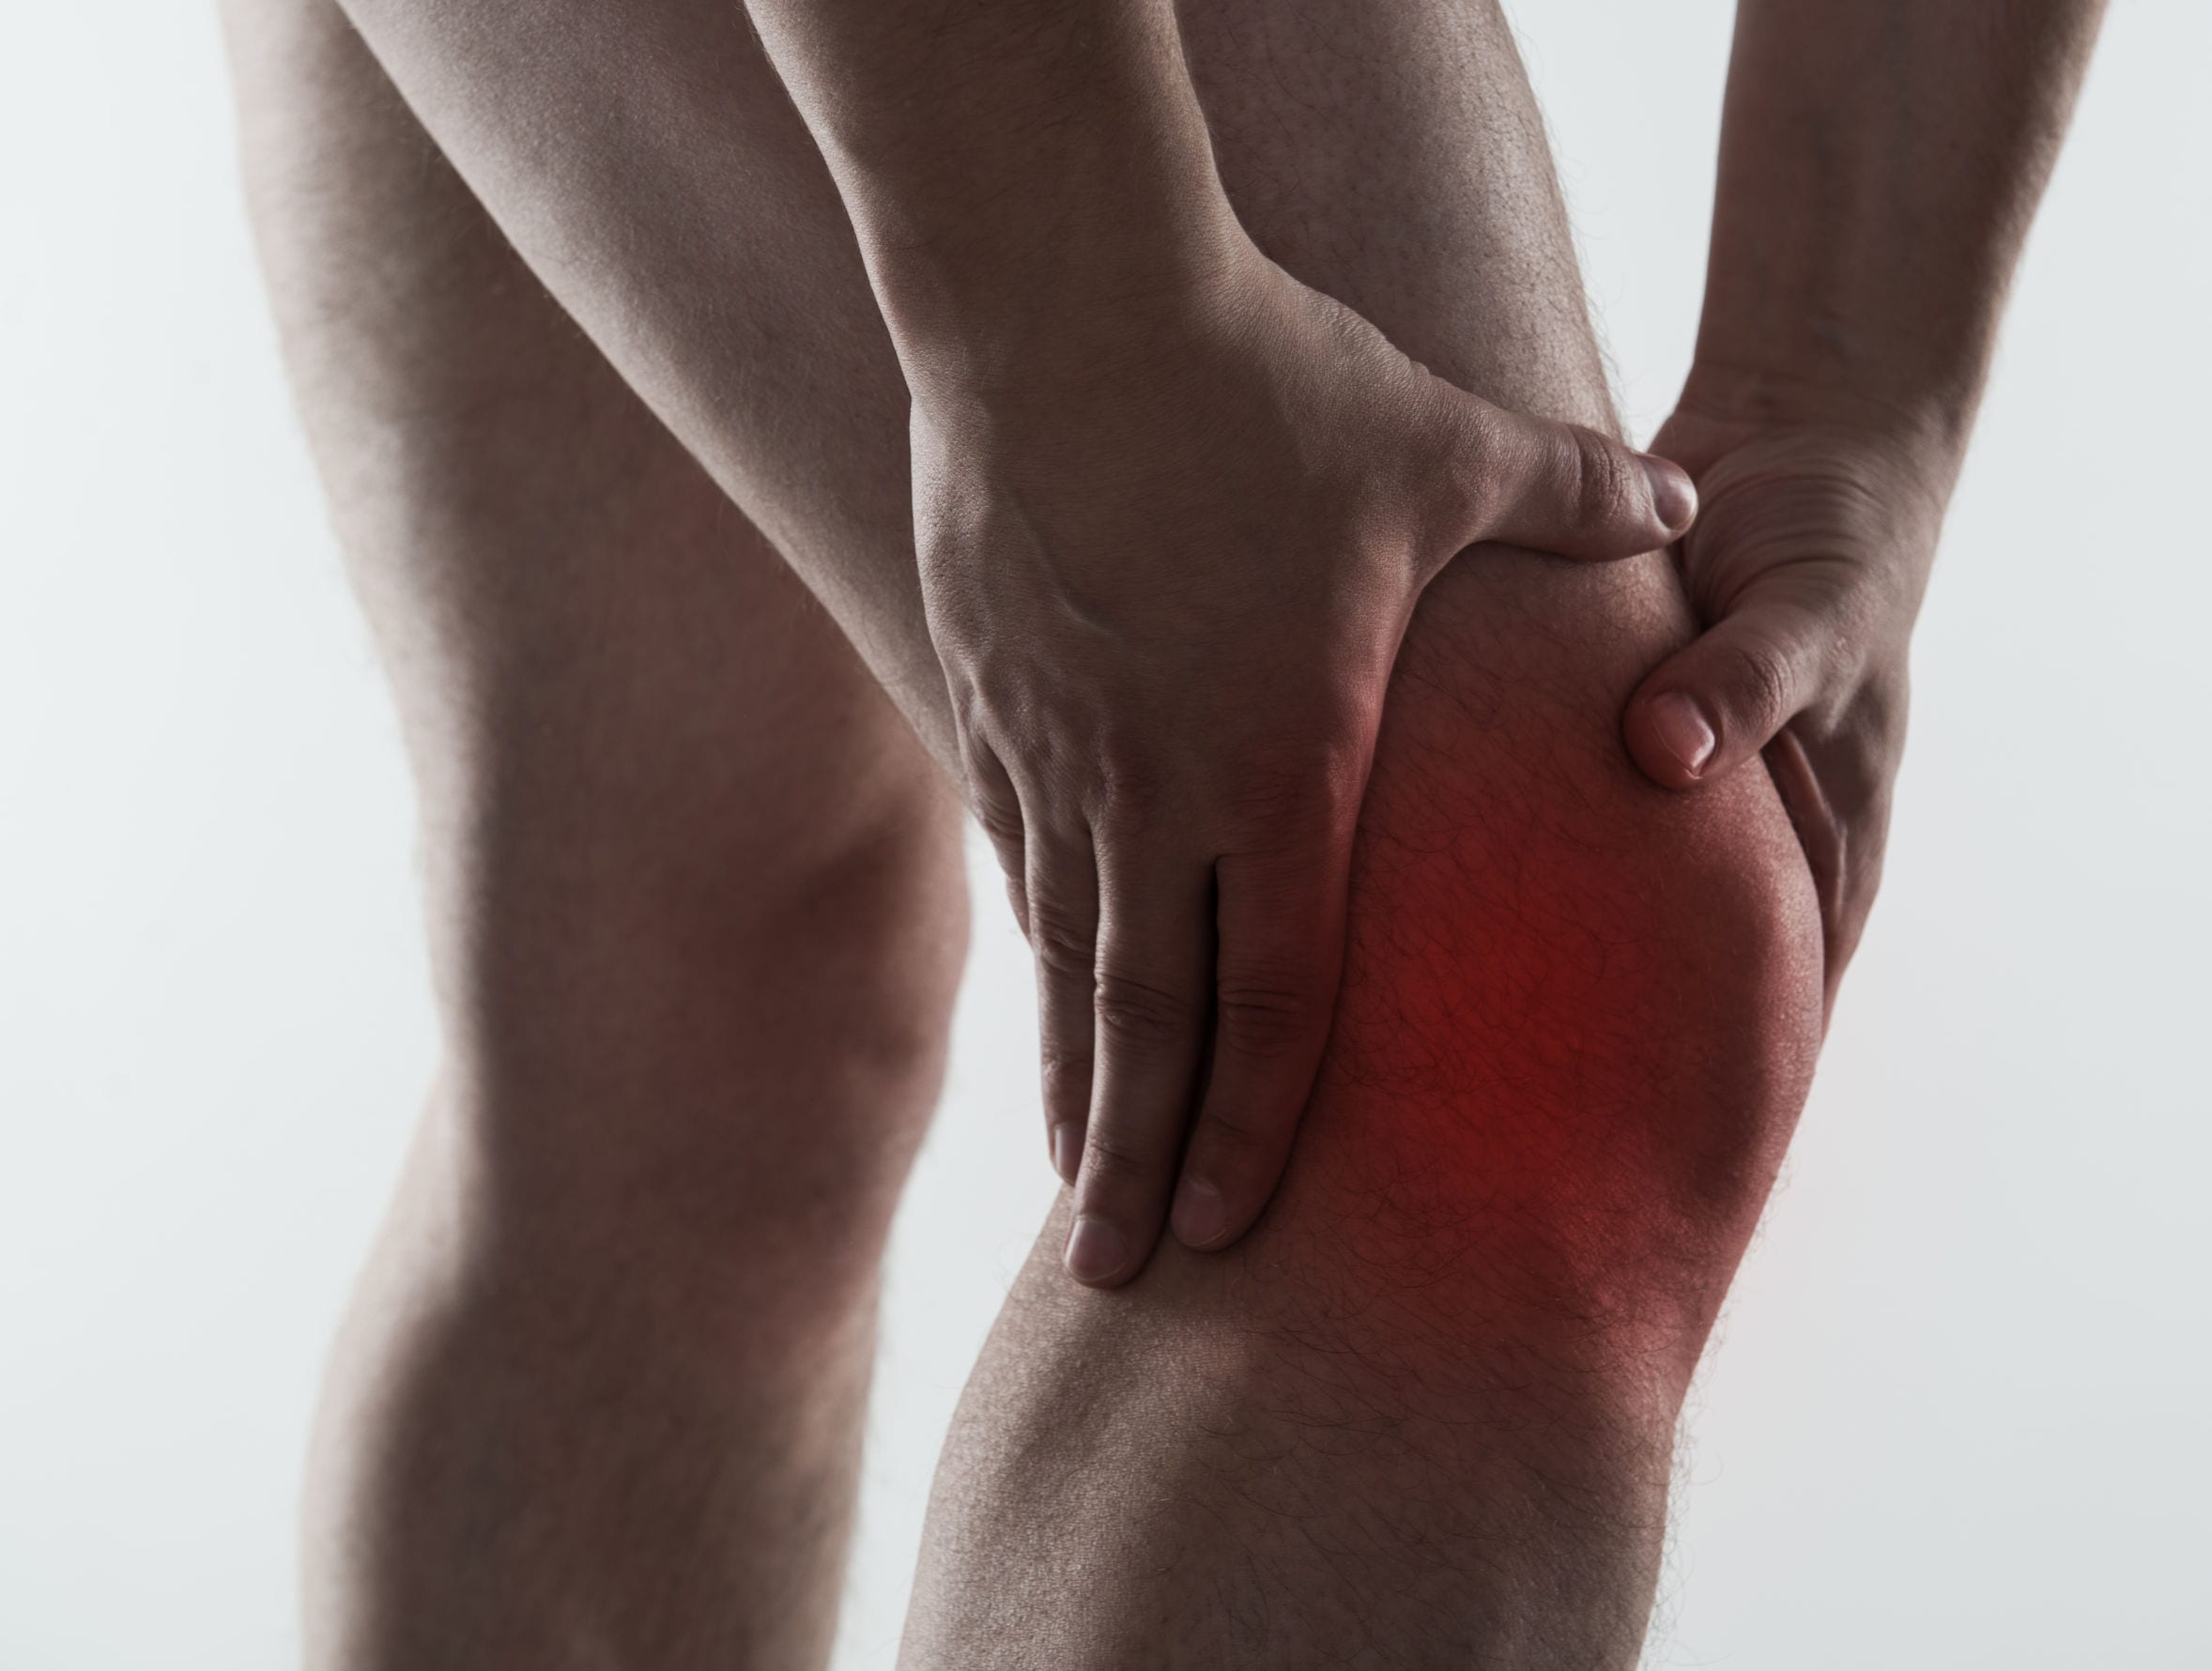 What You Can Do to Prevent Basketball Injuries